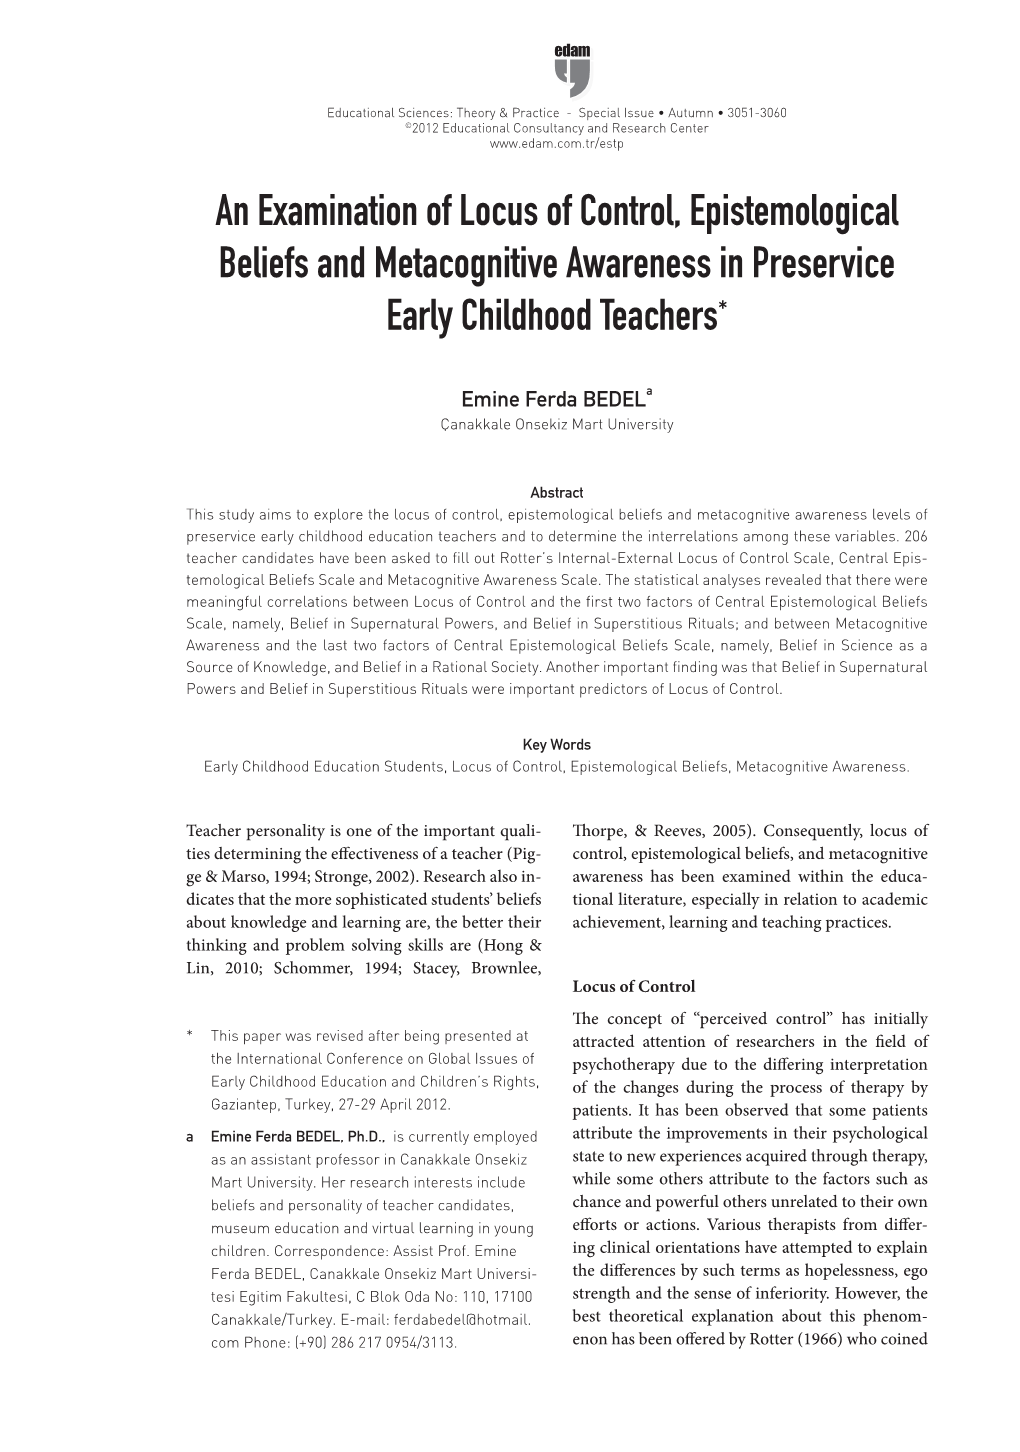 An Examination of Locus of Control, Epistemological Beliefs and Metacognitive Awareness in Preservice Early Childhood Teachers*